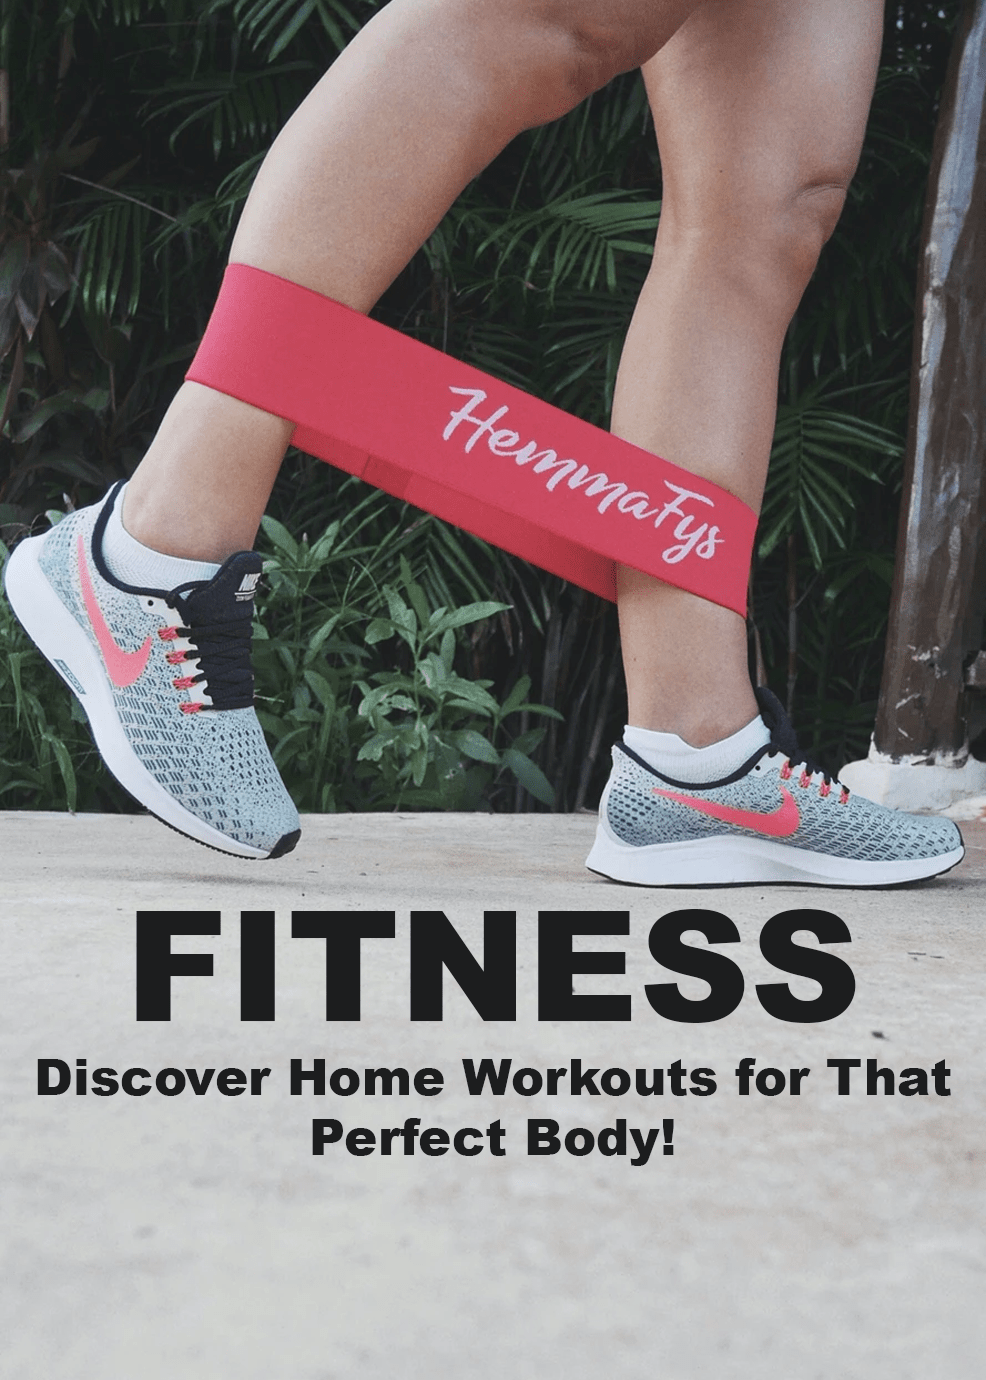 Fitness - Discover Home Workouts for That Perfect Body!